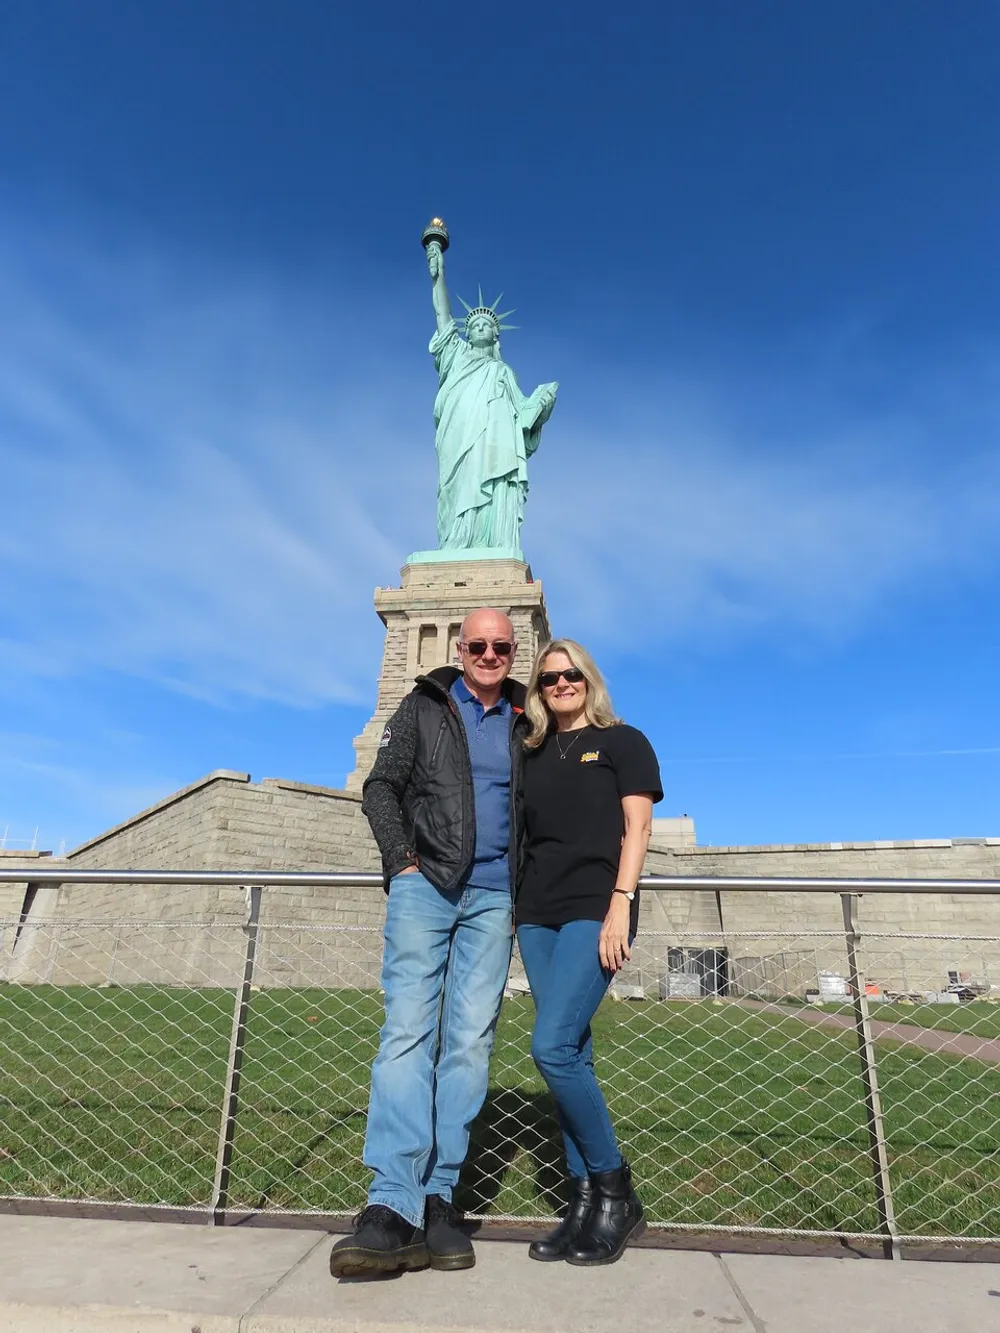 A smiling couple is posing for a photo in front of the Statue of Liberty under a clear blue sky